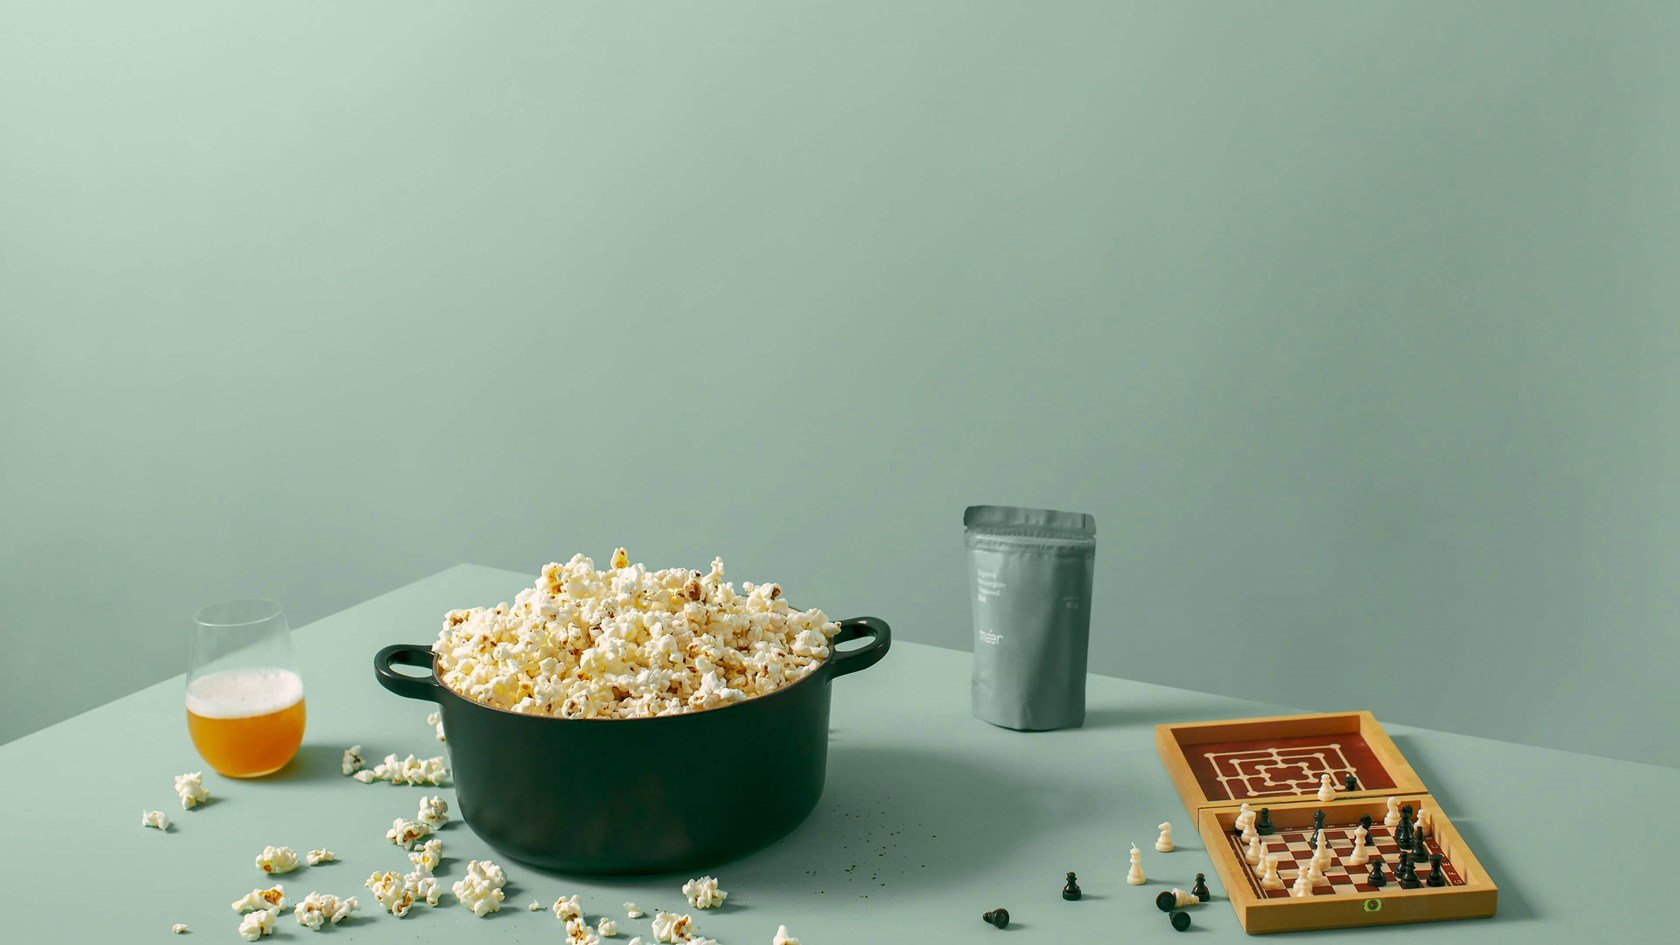 Popcorn in a bowl on a table with scattered pieces of popcorn and chess pieces